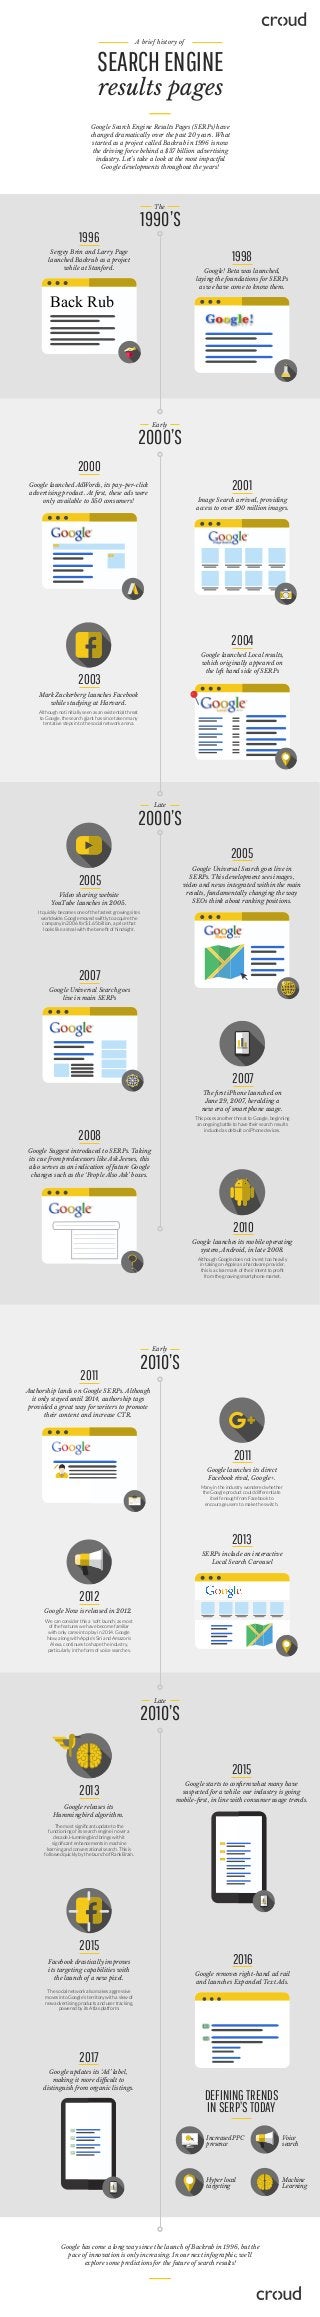 A brief history of
SEARCHENGINE
results pages
Google Search Engine Results Pages (SERPs) have
changed dramatically over the past 20 years. What
started as a project called Backrub in 1996 is now
the driving force behind a $37 billion advertising
industry. Let’s take a look at the most impactful
Google developments throughout the years!
1990’S
The
Sergey Brin and Larry Page
launched Backrub as a project
while at Stanford.
1996
Google! Beta was launched,
laying the foundations for SERPs
as we have come to know them.
1998
Back Rub
2000’S
Early
Google launched AdWords, its pay-per-click
advertising product. At ﬁrst, these ads were
only available to 350 consumers!
2000
Image Search arrived, providing
access to over 100 million images.
2001
Google launched Local results,
which originally appeared on
the left hand side of SERPs
2004
Mark Zuckerberg launches Facebook
while studying at Harvard.
2003
Although not initially seen as an existential threat
to Google, the search giant has since taken many
tentative steps into the social network arena.
Google Universal Search goes live in
SERPs. This development sees images,
video and news integrated within the main
results, fundamentally changing the way
SEOs think about ranking positions.
2005
2000’S
Late
Google Universal Search goes
live in main SERPs
2007
Google Suggest introduced to SERPs. Taking
its cue from predecessors like Ask Jeeves, this
also serves as an indication of future Google
changes such as the ‘People Also Ask’ boxes.
2008
Video sharing website
YouTube launches in 2005.
2005
It quickly becomes one of the fastest growing sites
worldwide. Google moved swiftly to acquire the
company in 2006 for $1.65 billion, a price that
looks like a steal with the beneﬁt of hindsight.
The ﬁrst iPhone launched on
June 29, 2007, heralding a
new era of smartphone usage.
2007
This poses another threat to Google, beginning
an ongoing battle to have their search results
included as default on iPhone devices.
Google launches its mobile operating
system, Android, in late 2008.
2010
Although Google does not invest too heavily
in taking on Apple as a hardware provider,
this is a clear mark of their intent to proﬁt
from the growing smartphone market.
2010’S
Early
Authorship lands on Google SERPs. Although
it only stayed until 2014, authorship tags
provided a great way for writers to promote
their content and increase CTR.
2011
SERPs include an interactive
Local Search Carousel
2013
Google launches its direct
Facebook rival, Google+.
2011
Many in the industry wondered whether
the Google product could differentiate
itself enough from Facebook to
encourage users to make the switch.
Google Now is released in 2012.
2012
We can consider this a ‘soft launch’, as most
of the features we have become familiar
with only came into play in 2014. Google
Now, along with Apple’s Siri and Amazon’s
Alexa, continues to shape the industry,
particularly in the form of voice searches.
2010’S
Late
Google starts to conﬁrm what many have
suspected for a while: our industry is going
mobile-ﬁrst, in line with consumer usage trends.
2015
Google releases its
Hummingbird algorithm.
2013
The most signiﬁcant update to the
functioning of its search engine in over a
decade. Hummingbird brings with it
signiﬁcant enhancements in machine
learning and conversational search. This is
followed quickly by the launch of RankBrain.
Facebook drastically improves
its targeting capabilities with
the launch of a new pixel.
2015
The social network also makes aggressive
moves into Google’s territory with a slew of
new advertising products and user tracking,
powered by its Atlas platform.
Google removes right-hand ad rail
and launches Expanded Text Ads.
2016
Google updates its ‘Ad’ label,
making it more diﬃcult to
distinguish from organic listings.
2017
Google has come a long way since the launch of Backrub in 1996, but the
pace of innovation is only increasing. In our next infographic, we’ll
explore some predictions for the future of search results!
DEFININGTRENDS
INSERP’STODAY
Increased PPC
presence
Voice
search
Hyper local
targeting
Machine
Learning
 